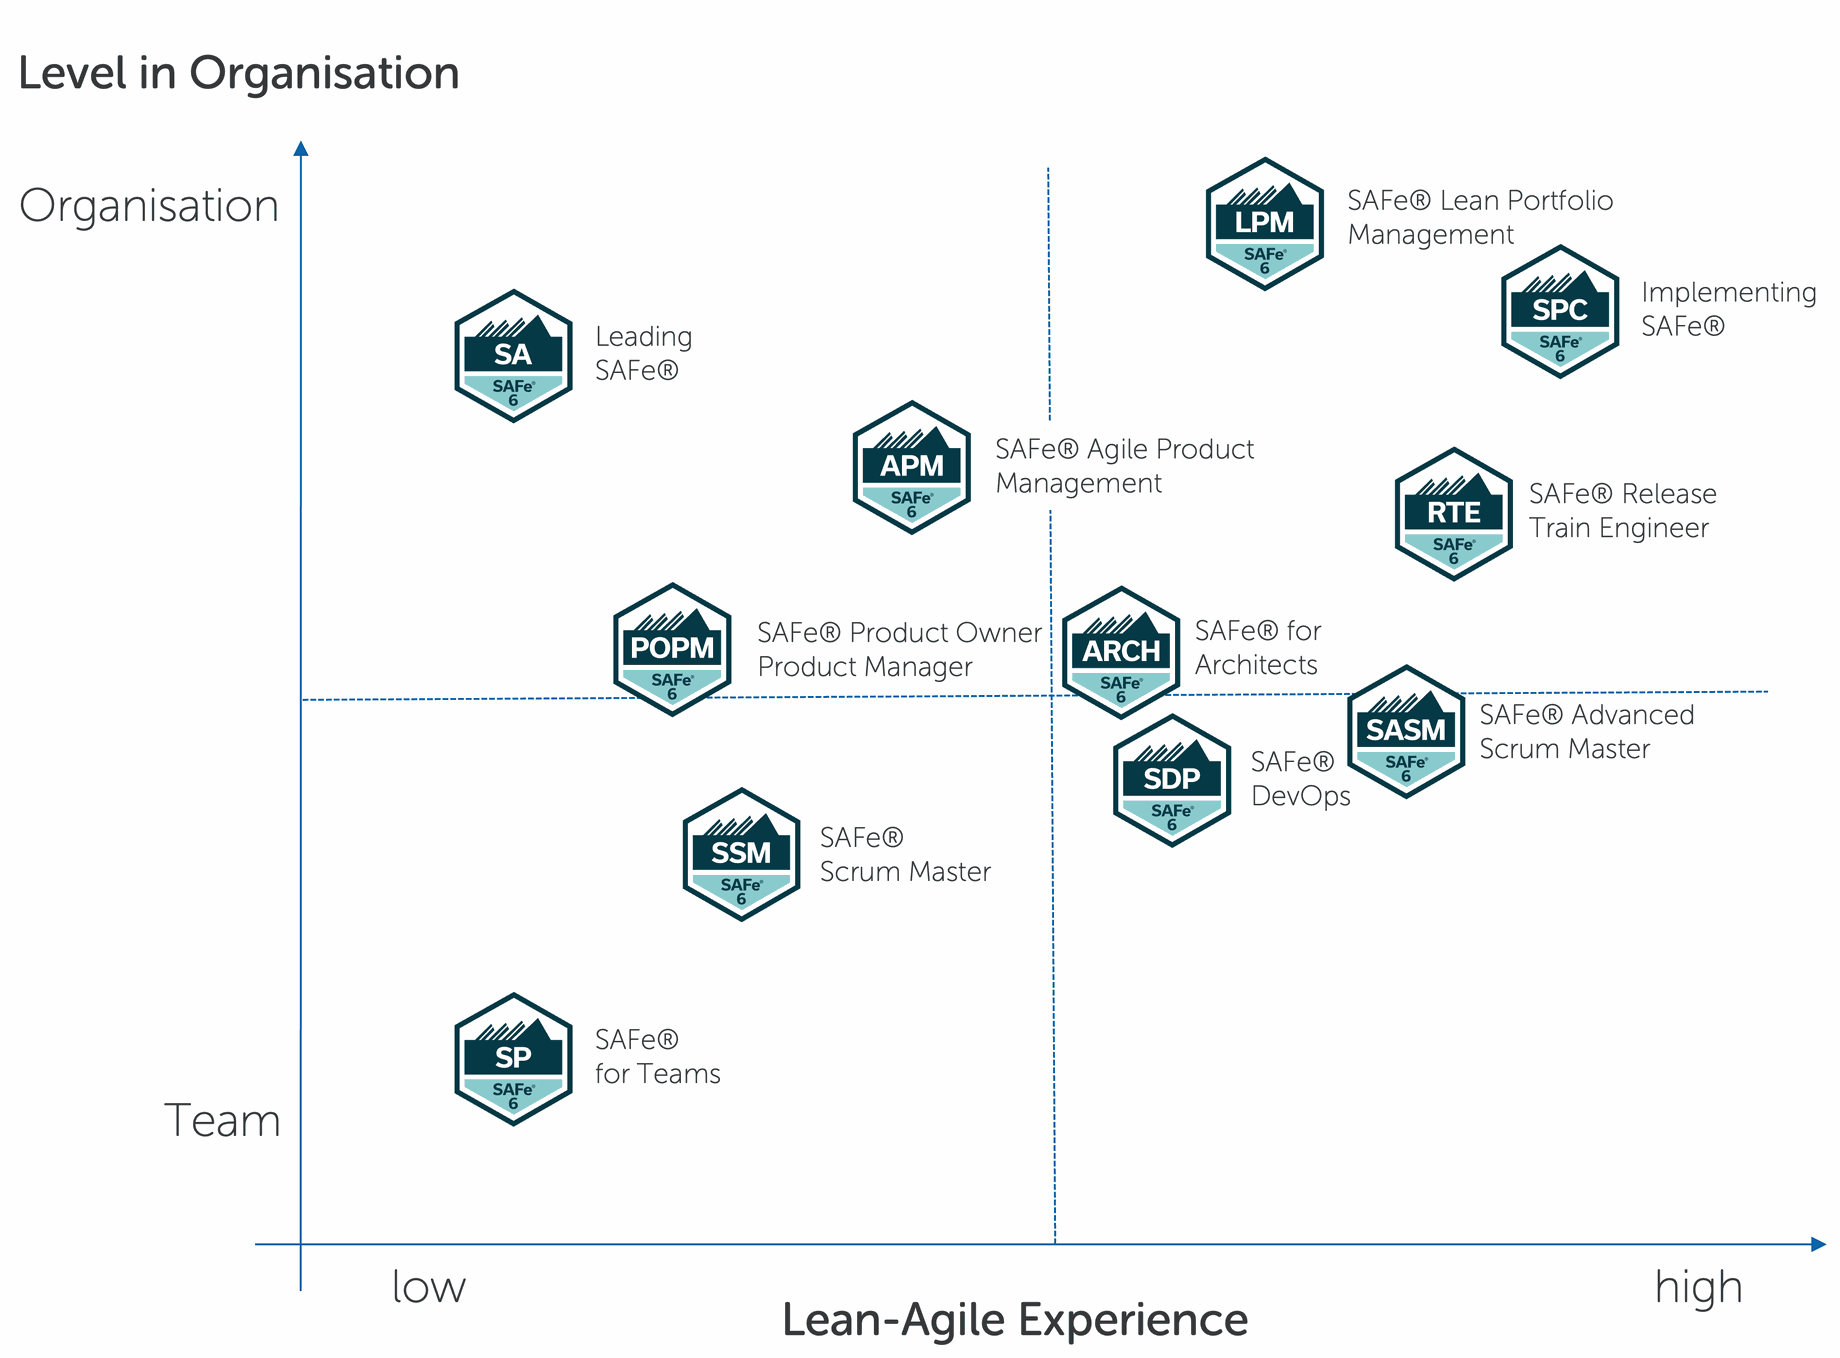 Overview of SAFe Trainings depending on role in organisation and agile experience